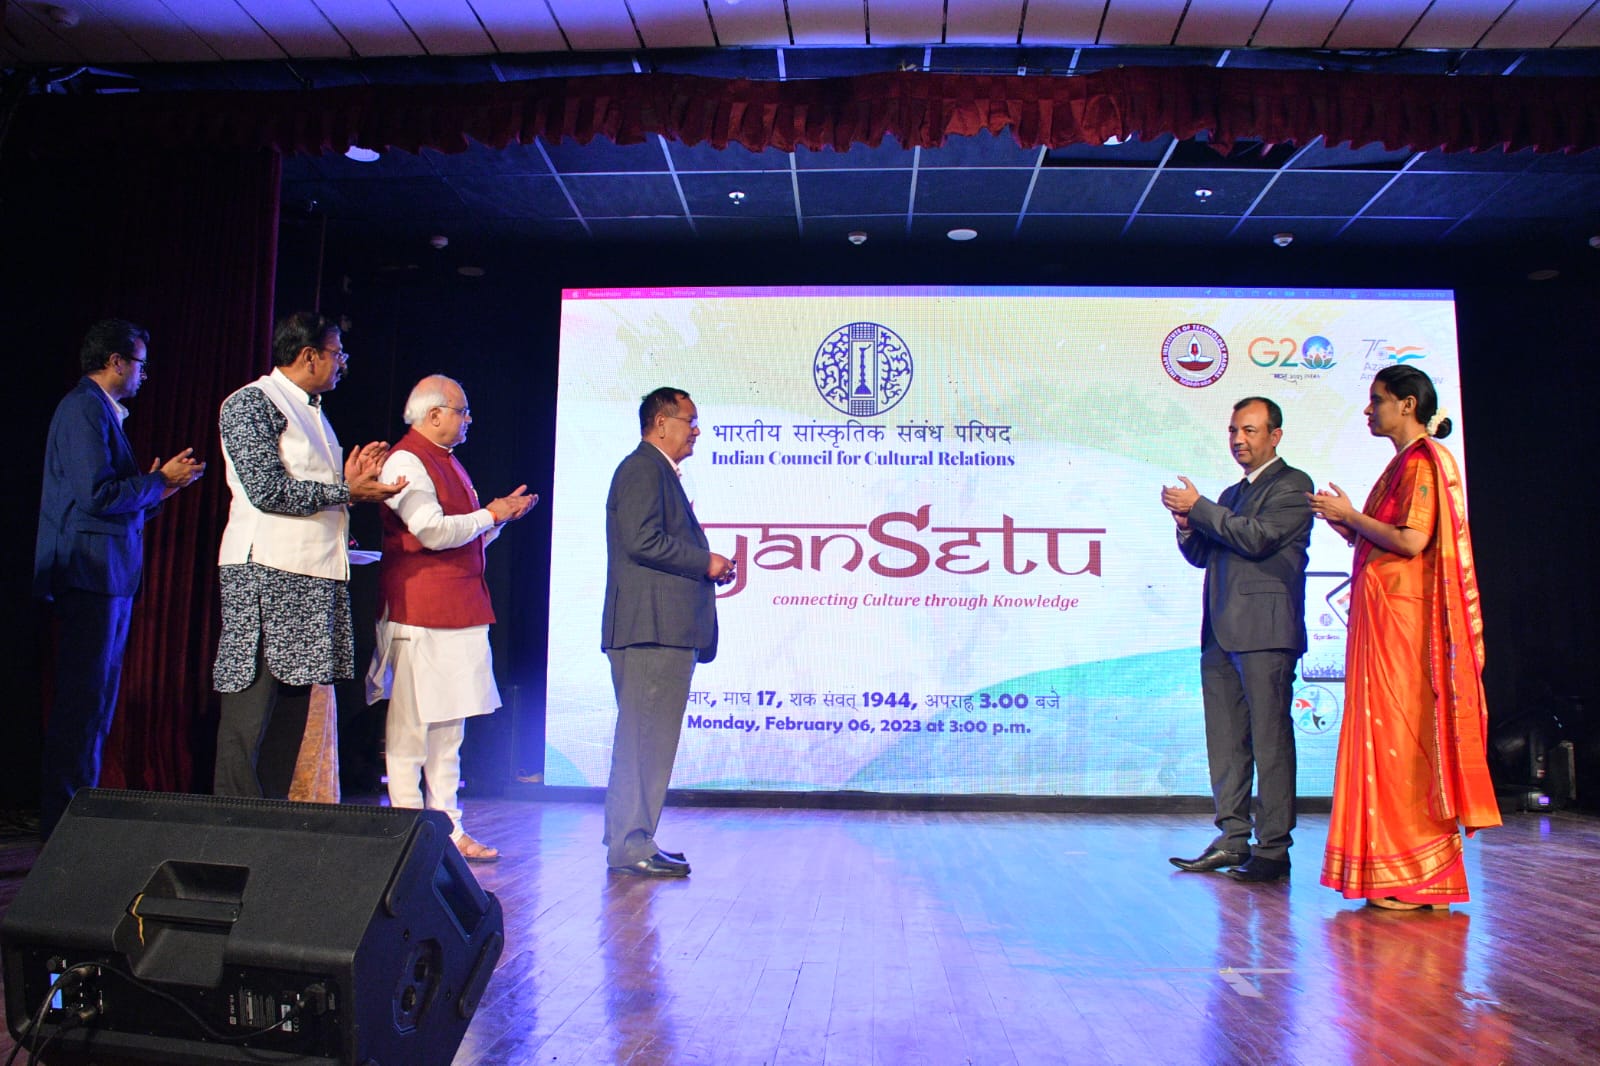 GyanSetu Connecting Culture through Knowledge' by MoS for External Affairs & Education Hon'ble Dr. Rajkumar Ranjan Singh in the presence of President, ICCR Dr. Vinay Sahasrabuddhe initiating ICCR Digitization 2.0 with the automation of ICCR Scholarship